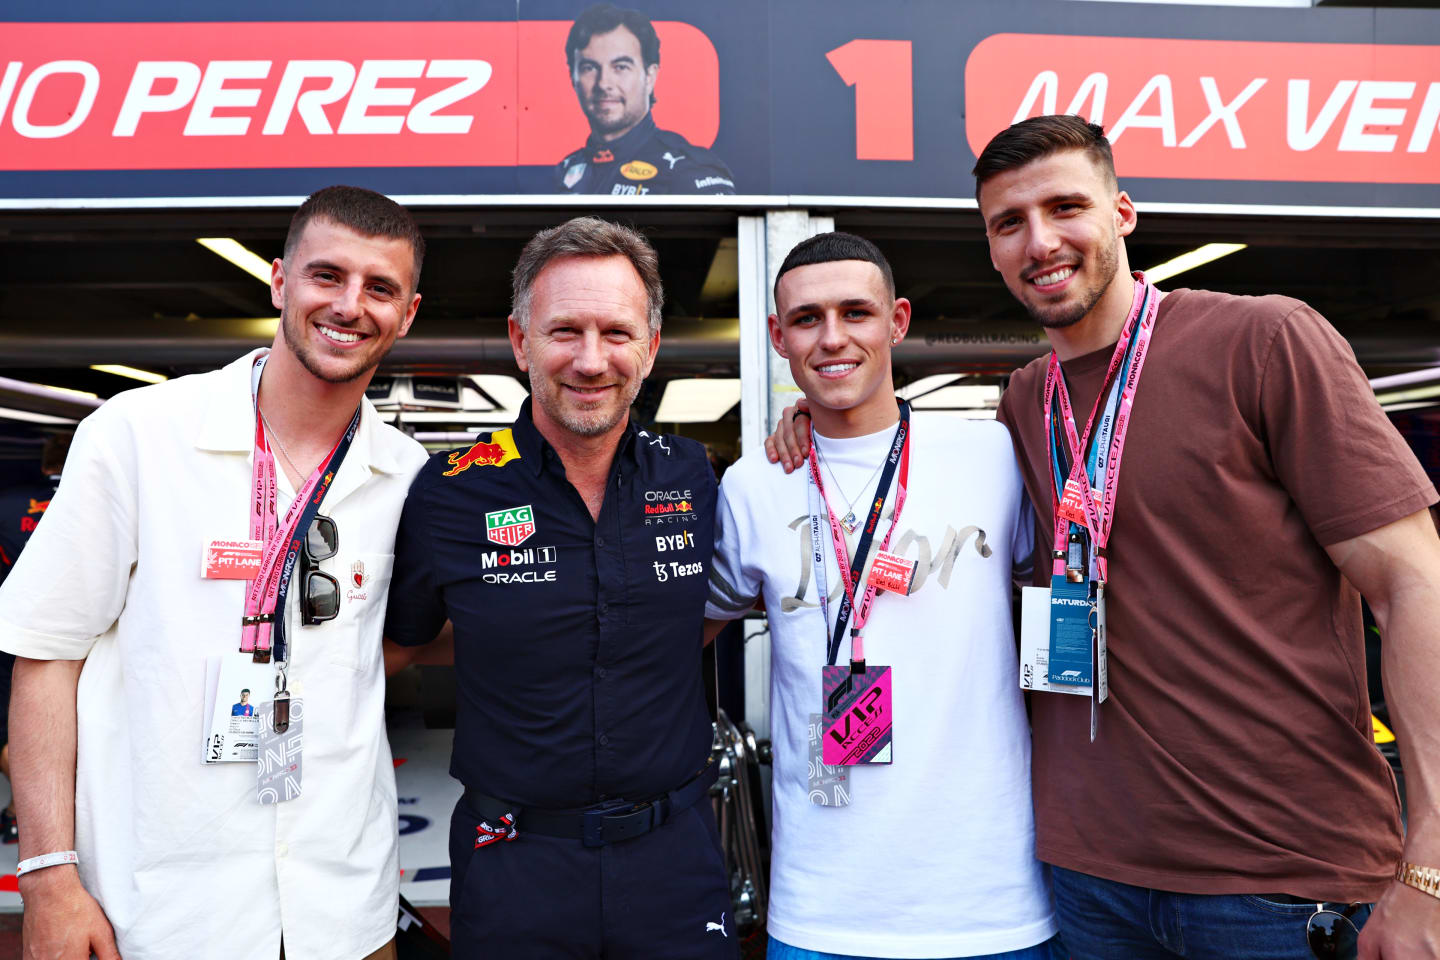 MONTE-CARLO, MONACO - MAY 28: (L-R) Mason Mount, Red Bull Racing Team Principal Christian Horner, Phil Foden and Ruben Dias pose for a photo prior to qualifying ahead of the F1 Grand Prix of Monaco at Circuit de Monaco on May 28, 2022 in Monte-Carlo, Monaco. (Photo by Mark Thompson/Getty Images)